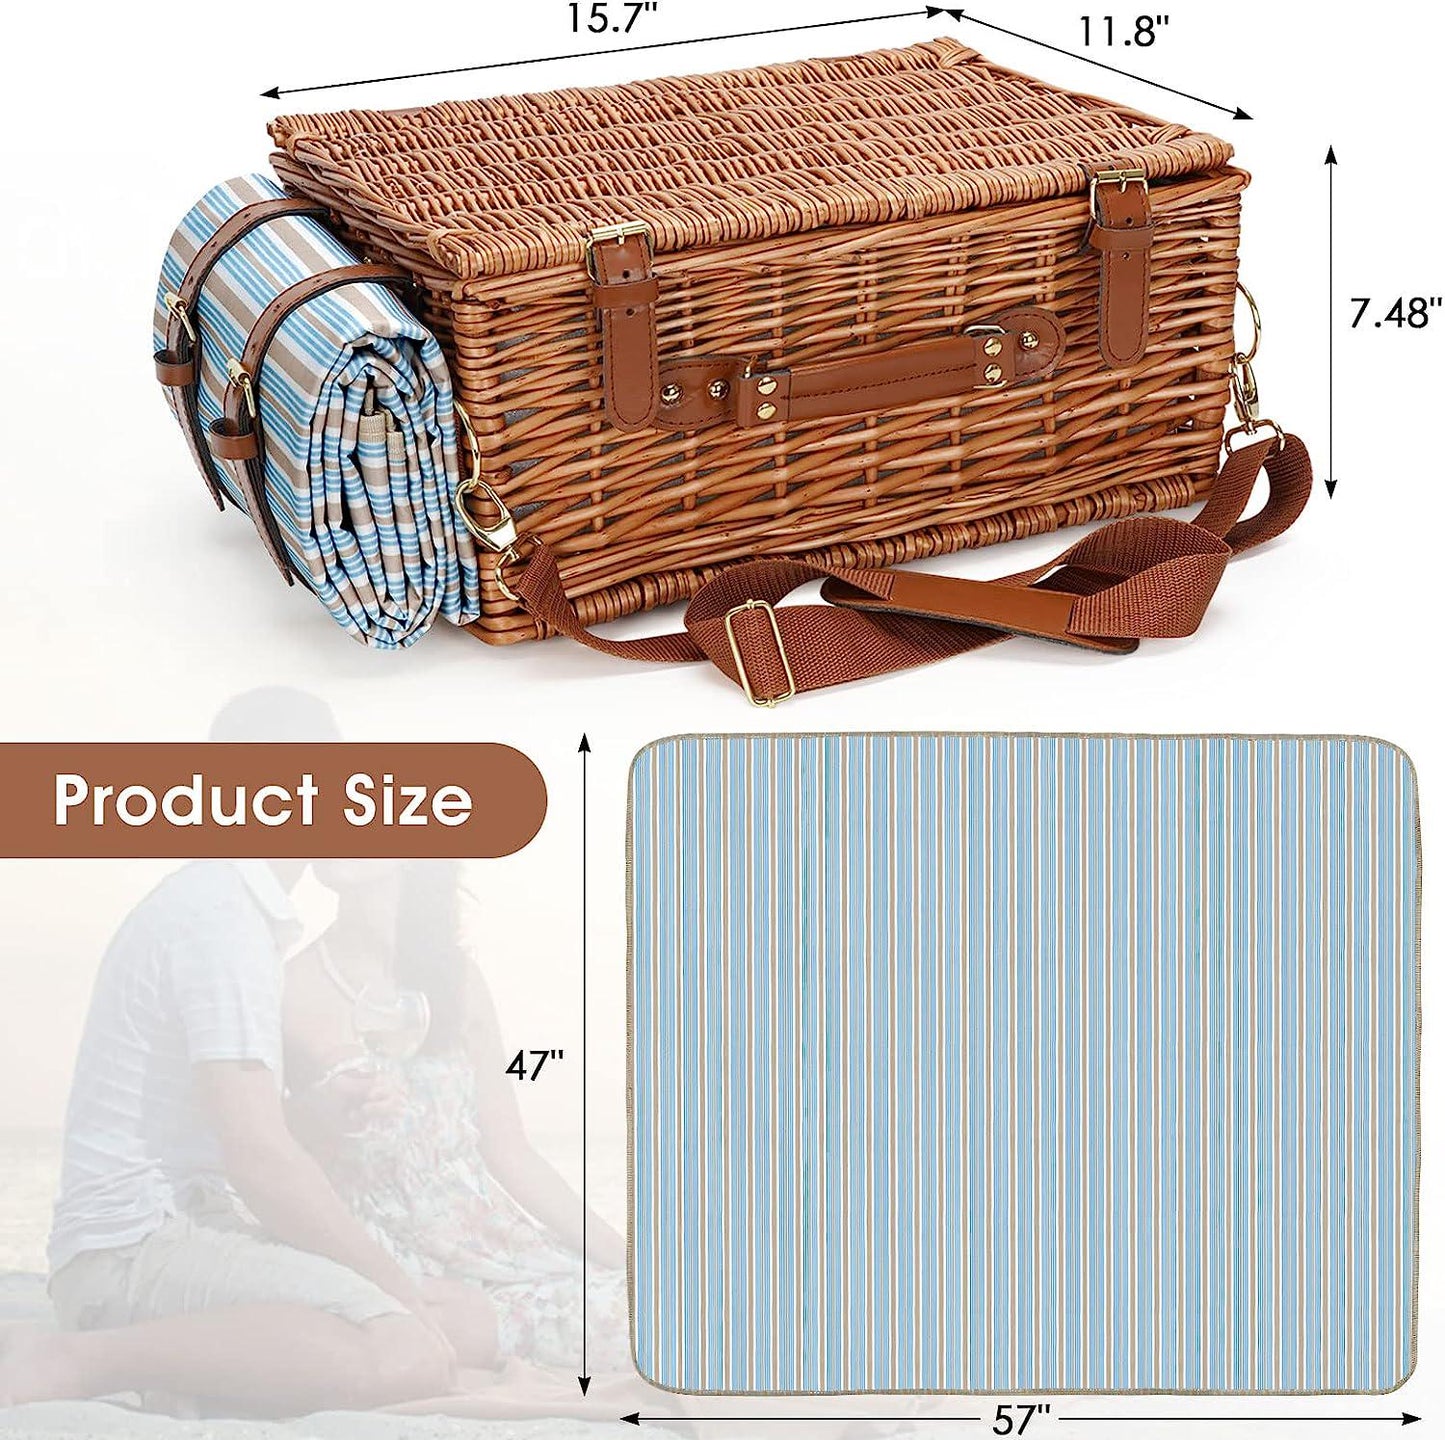 Picnic Cooler Basket Set for 2 Persons with Large Waterproof Picnic Blanket, Cutlery Service Kit and Adjustable Strap